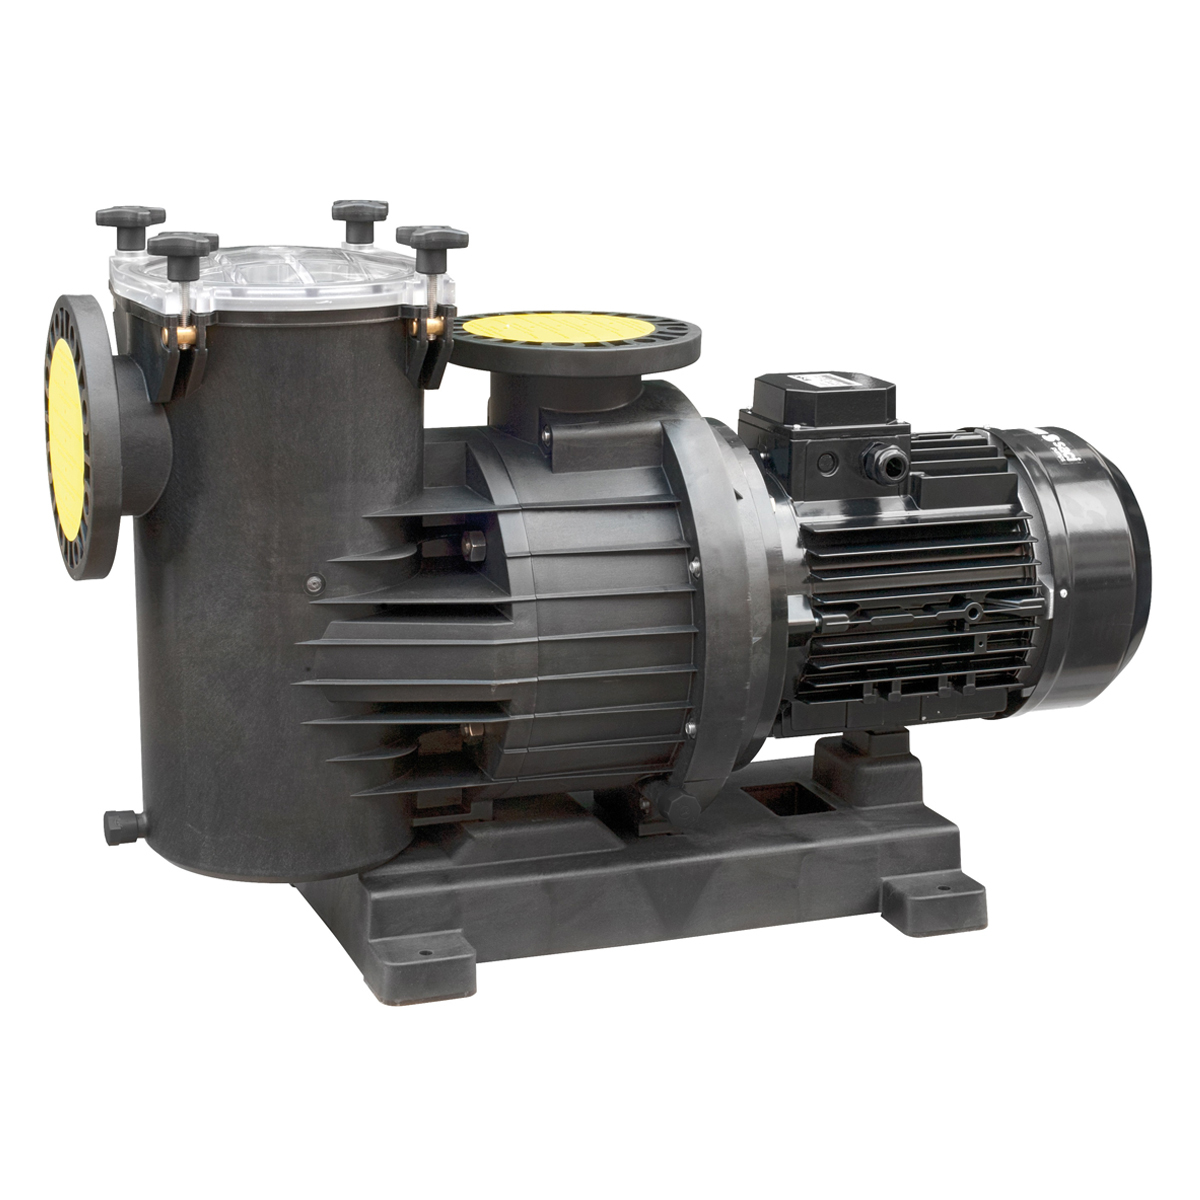 Smart Power Filter Pump 1500 400-690V, 2850 rpm 11 kW, 15 HP, 175 m3/h at 10m Smart Power Filter Pump 1500 400-690V, 2850 rpm 11 kW, 15 HP, 175 m3/h at 10m